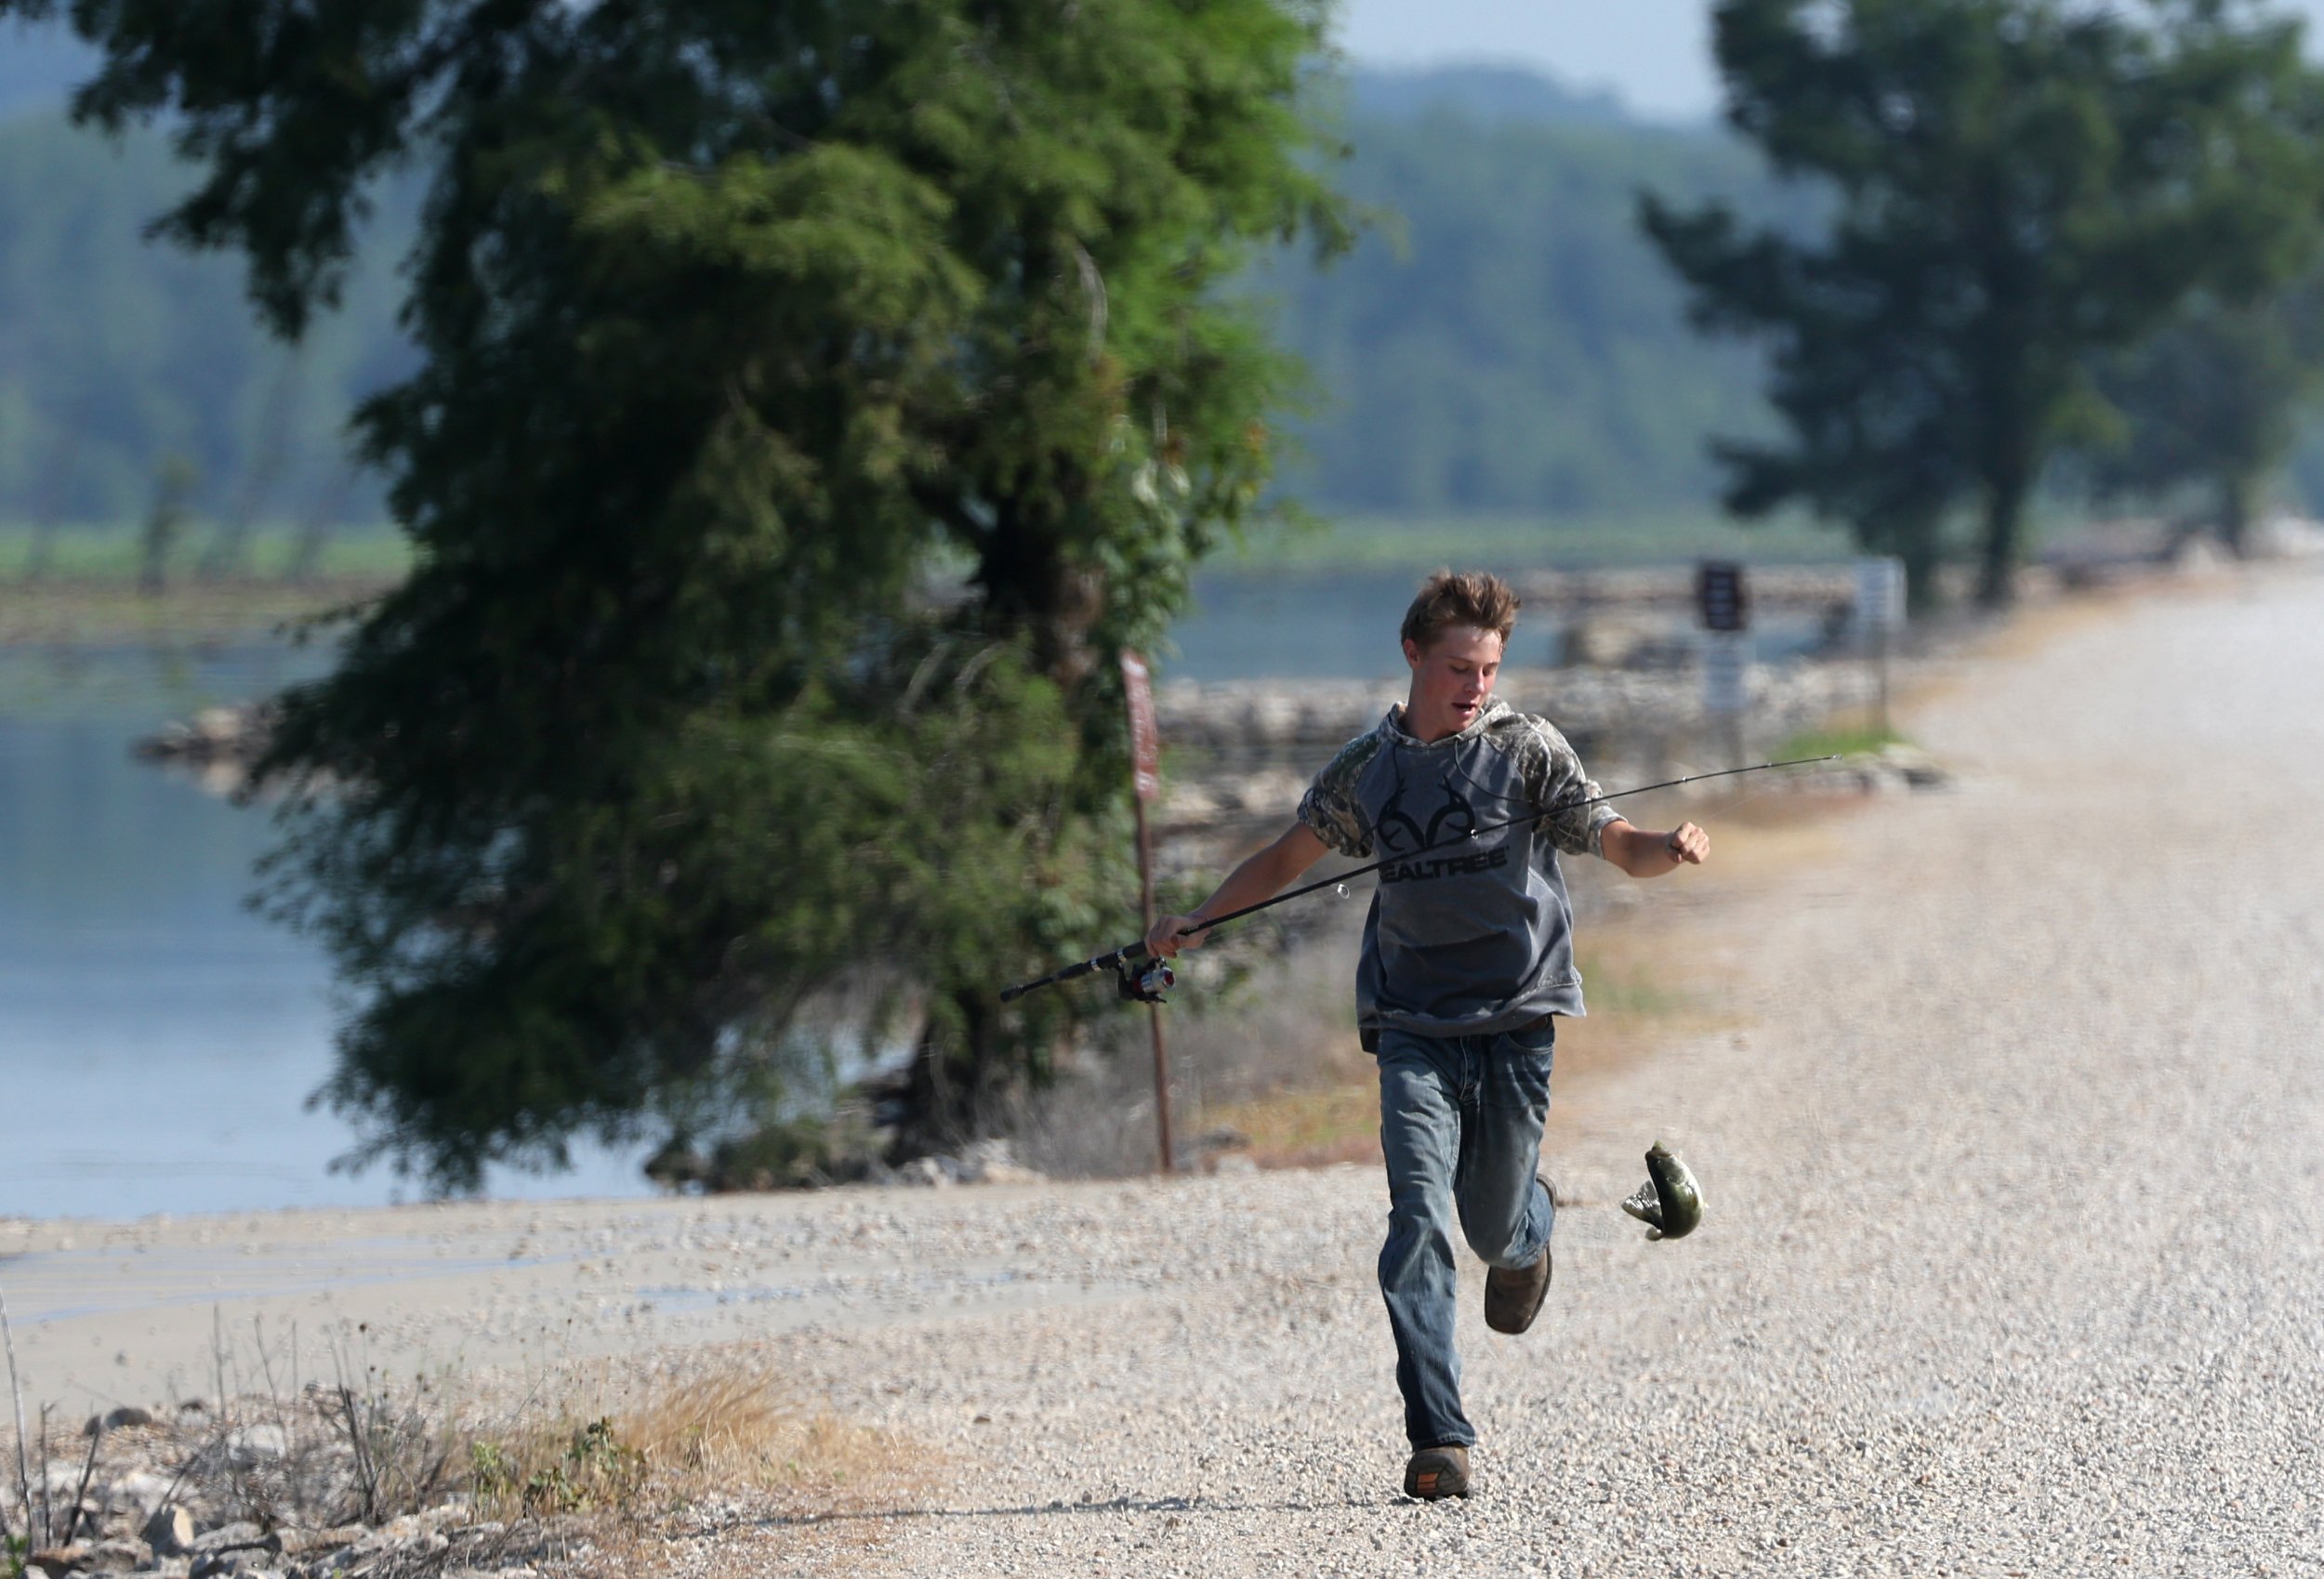  Jeremy Kilburn, 15, runs up the road to his grandfather Tom Kilburn after catching a fish Thursday, June 18, 2023, at Duck Creek Conservation Area in Wayne County in Missouri. The northern snakehead, an invasive fish species, was found for the secon